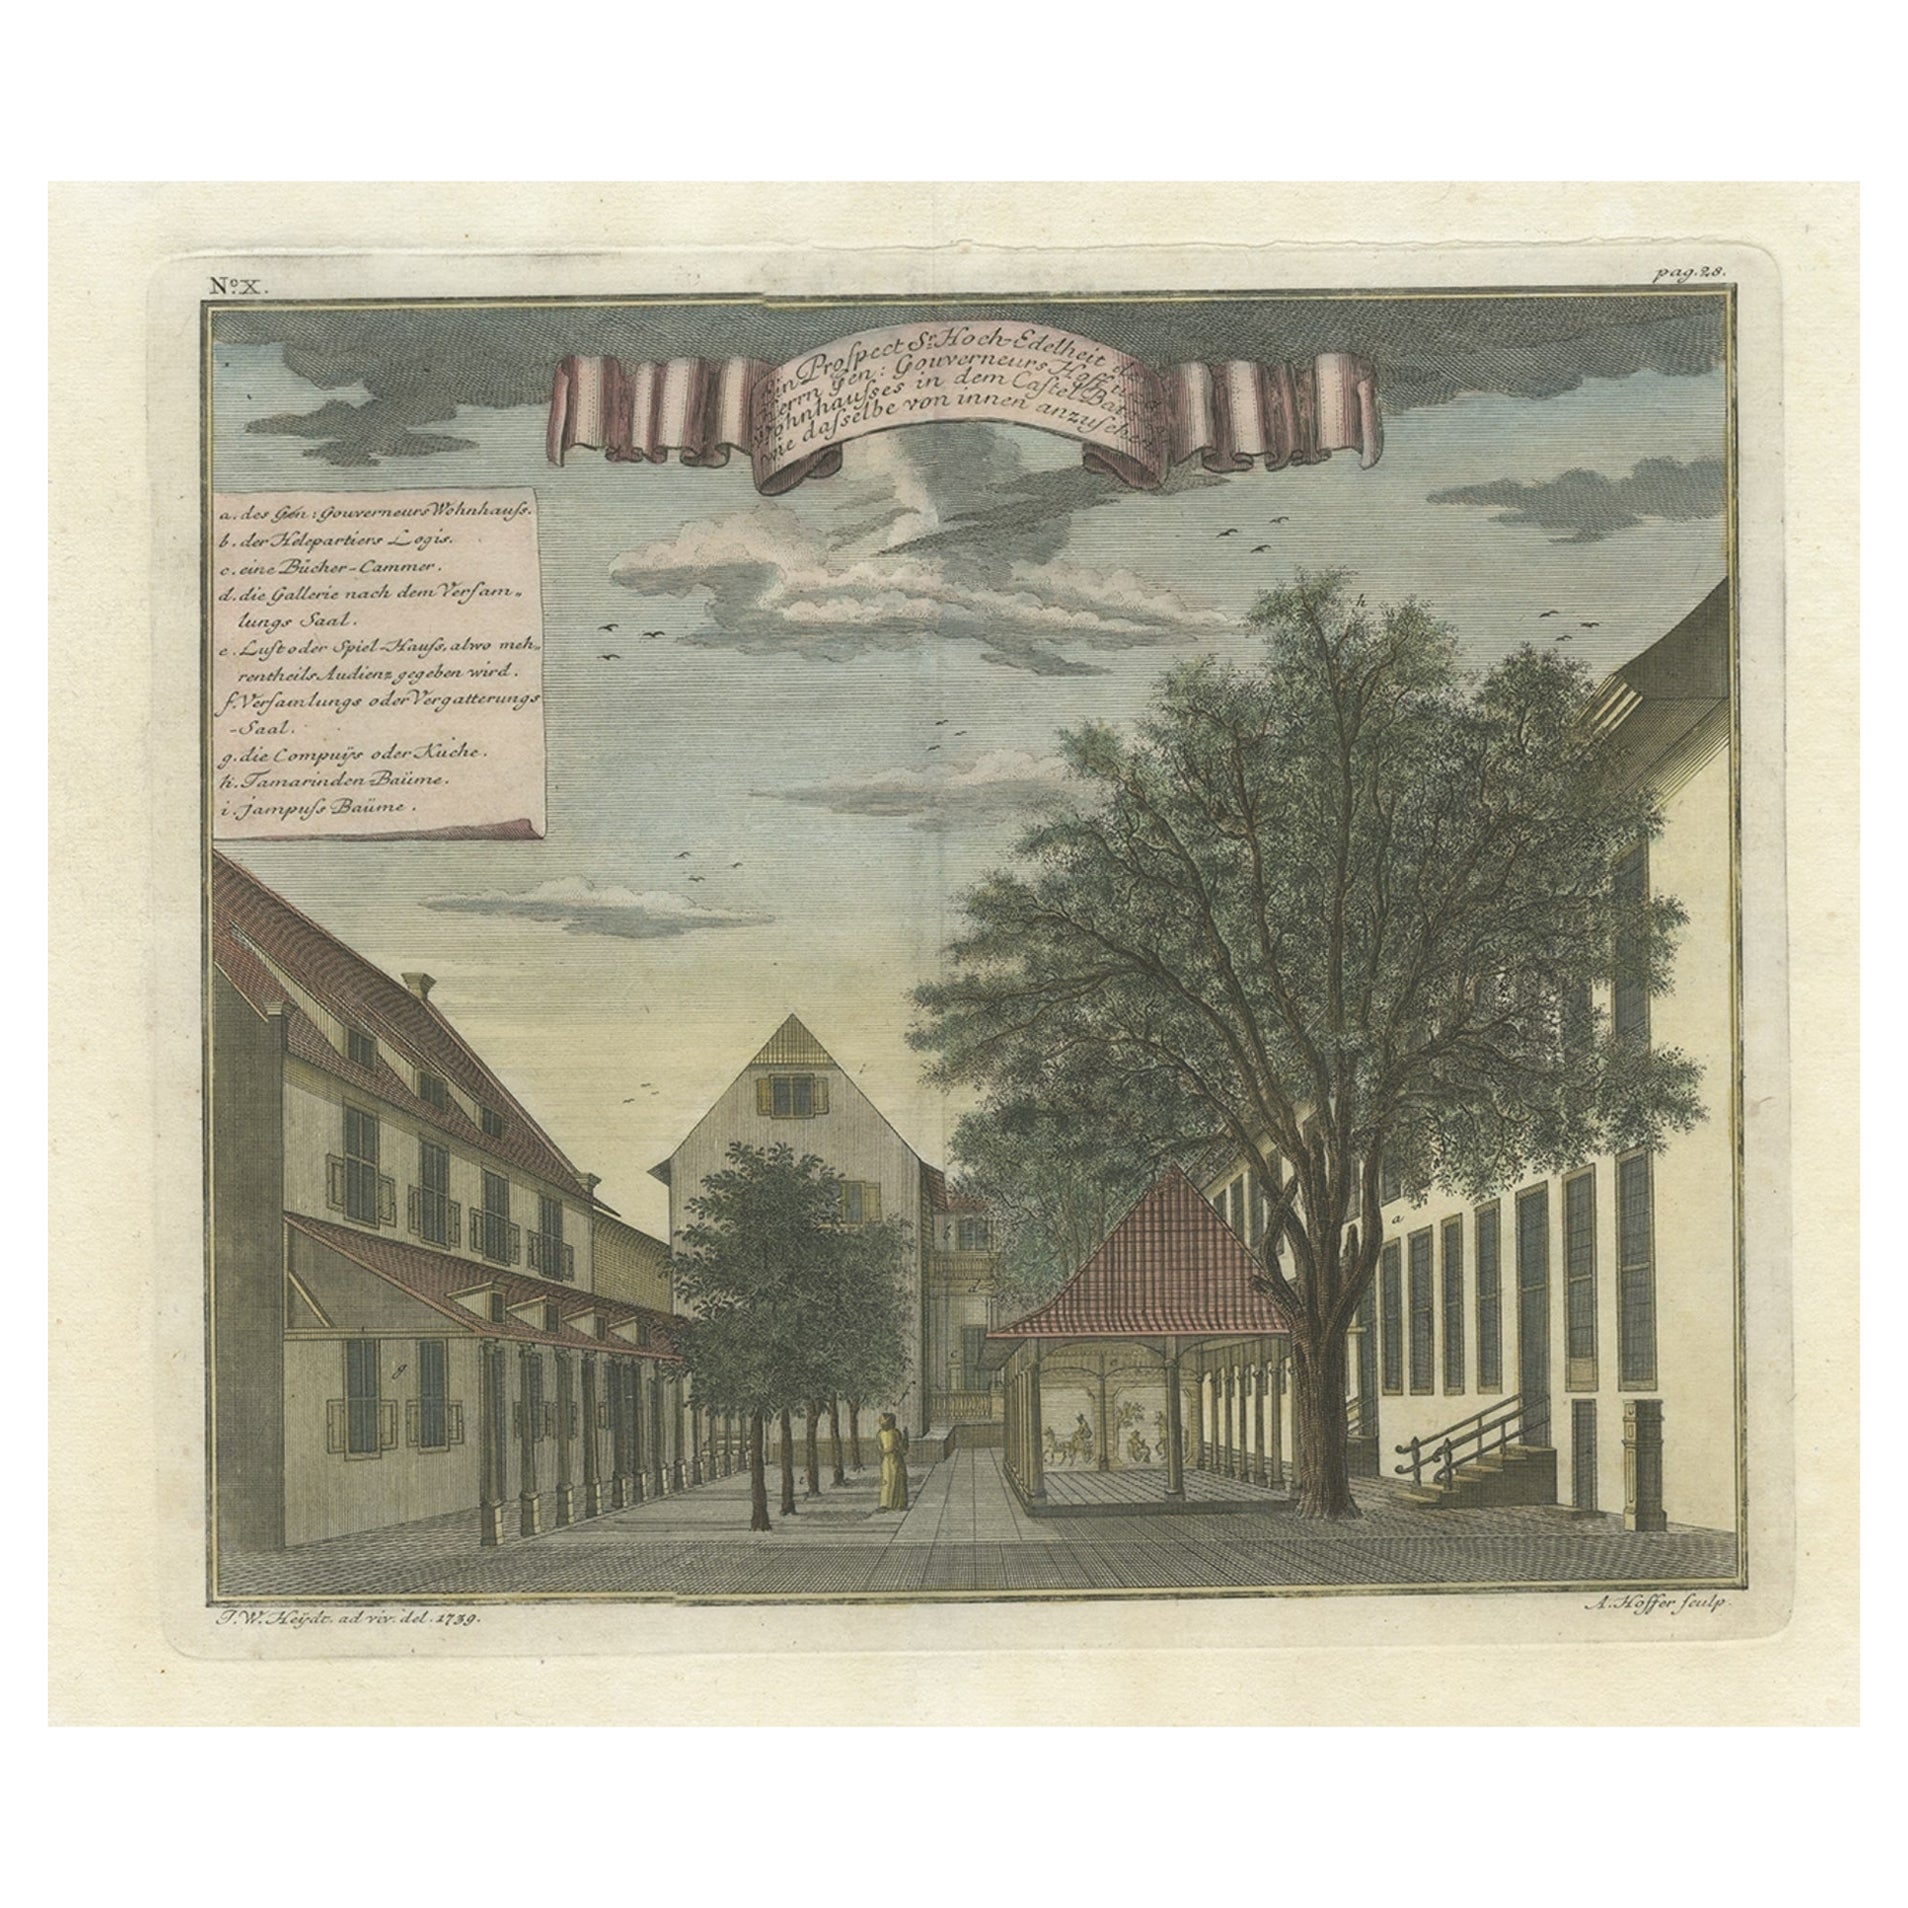 Rare Print of the Governor-General's Residence in Batavia 'Jakarta', Indonesia